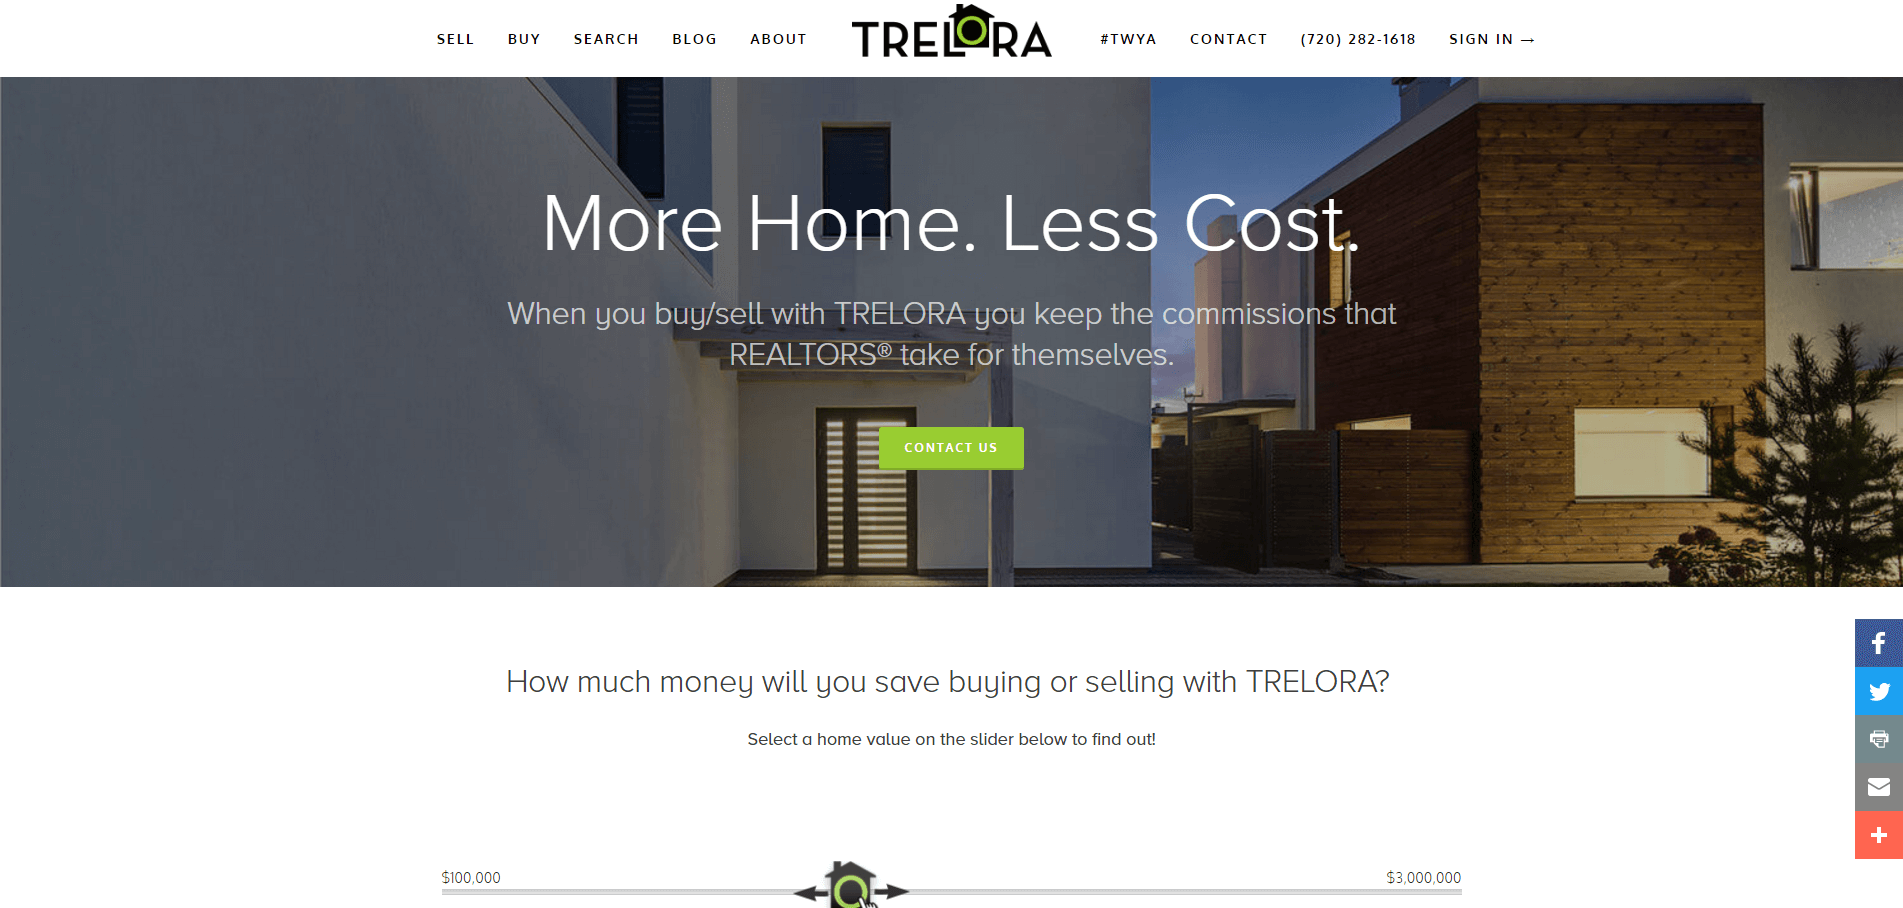  WOW!  We made a list of the 101 best real estate websites.  Each site is ranked 1-101 with a description and review.  Here's trelora.com.  Who made the cut? 